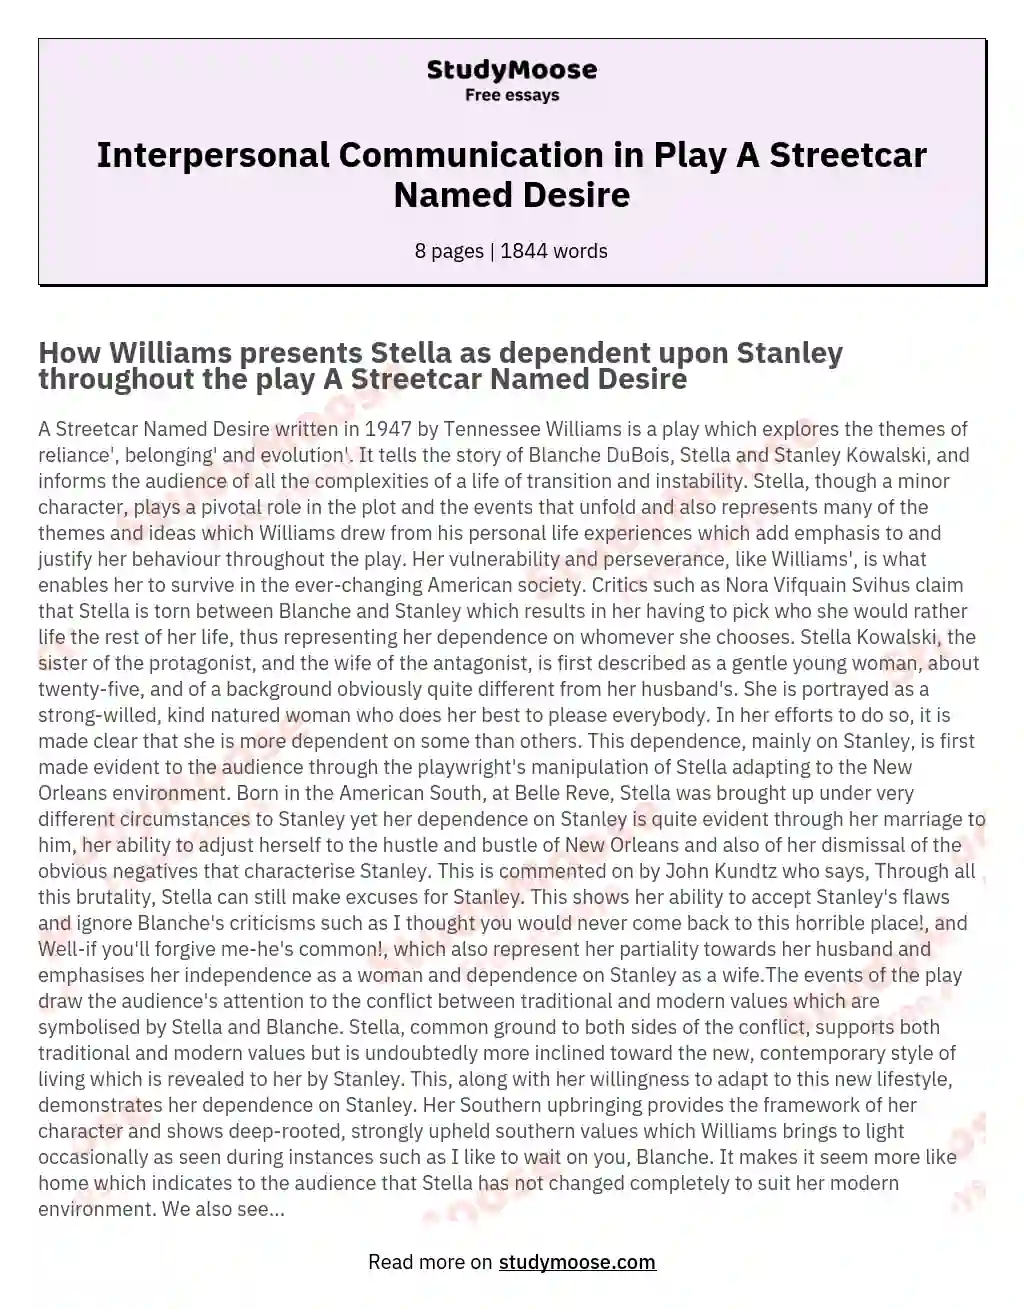 Interpersonal Communication in Play A Streetcar Named Desire